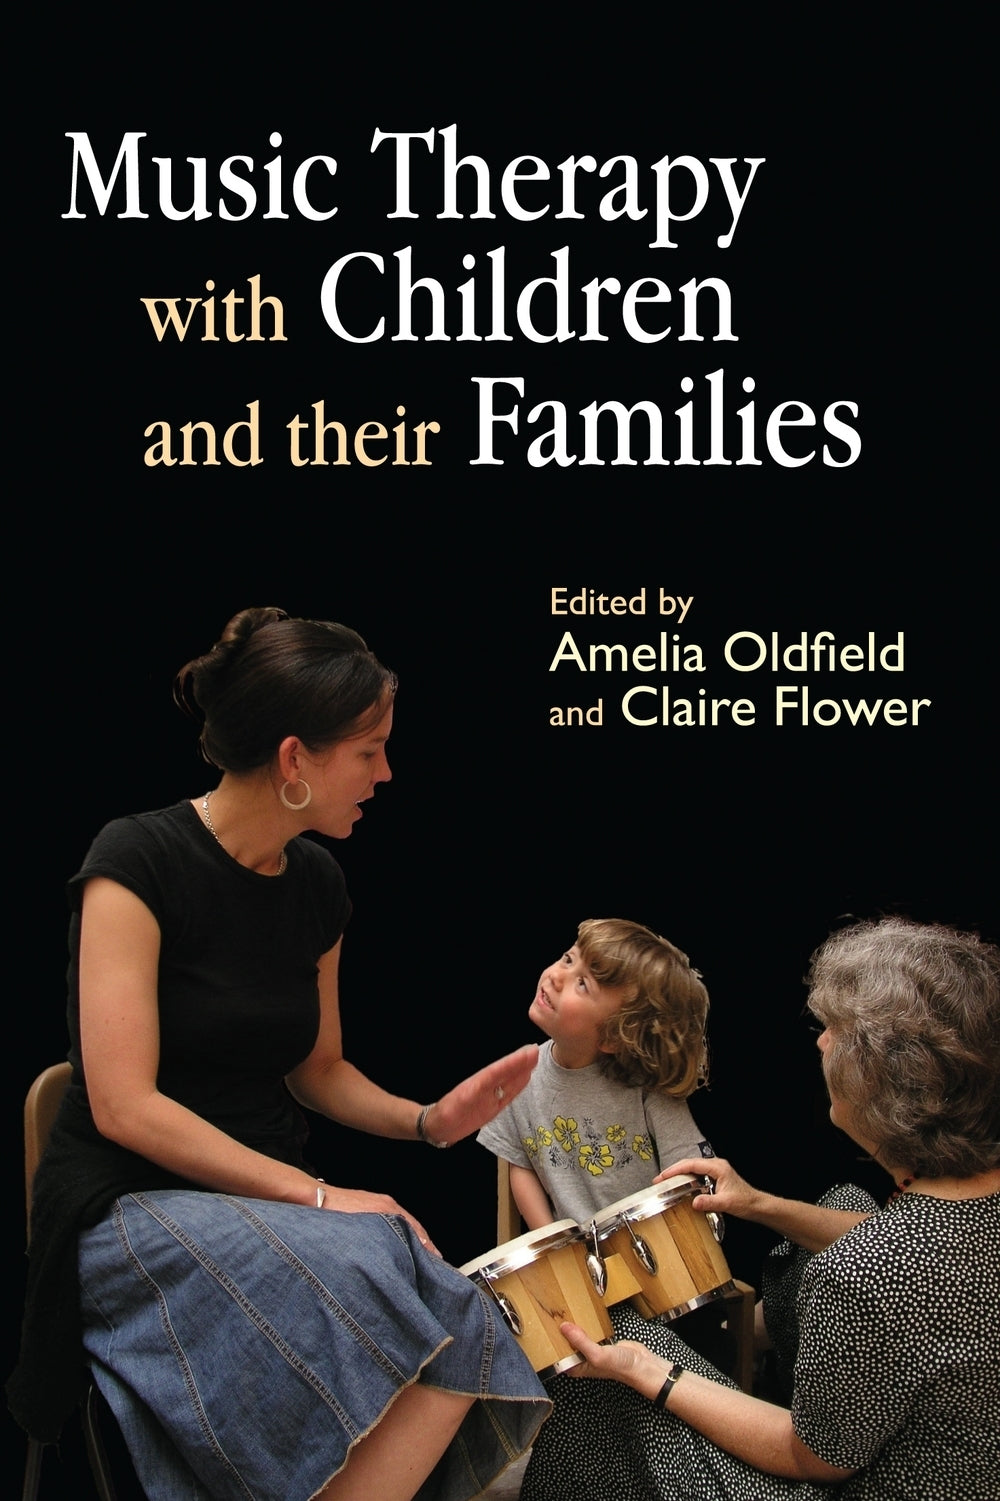 Music Therapy with Children and their Families by Amelia Oldfield, Claire Flower